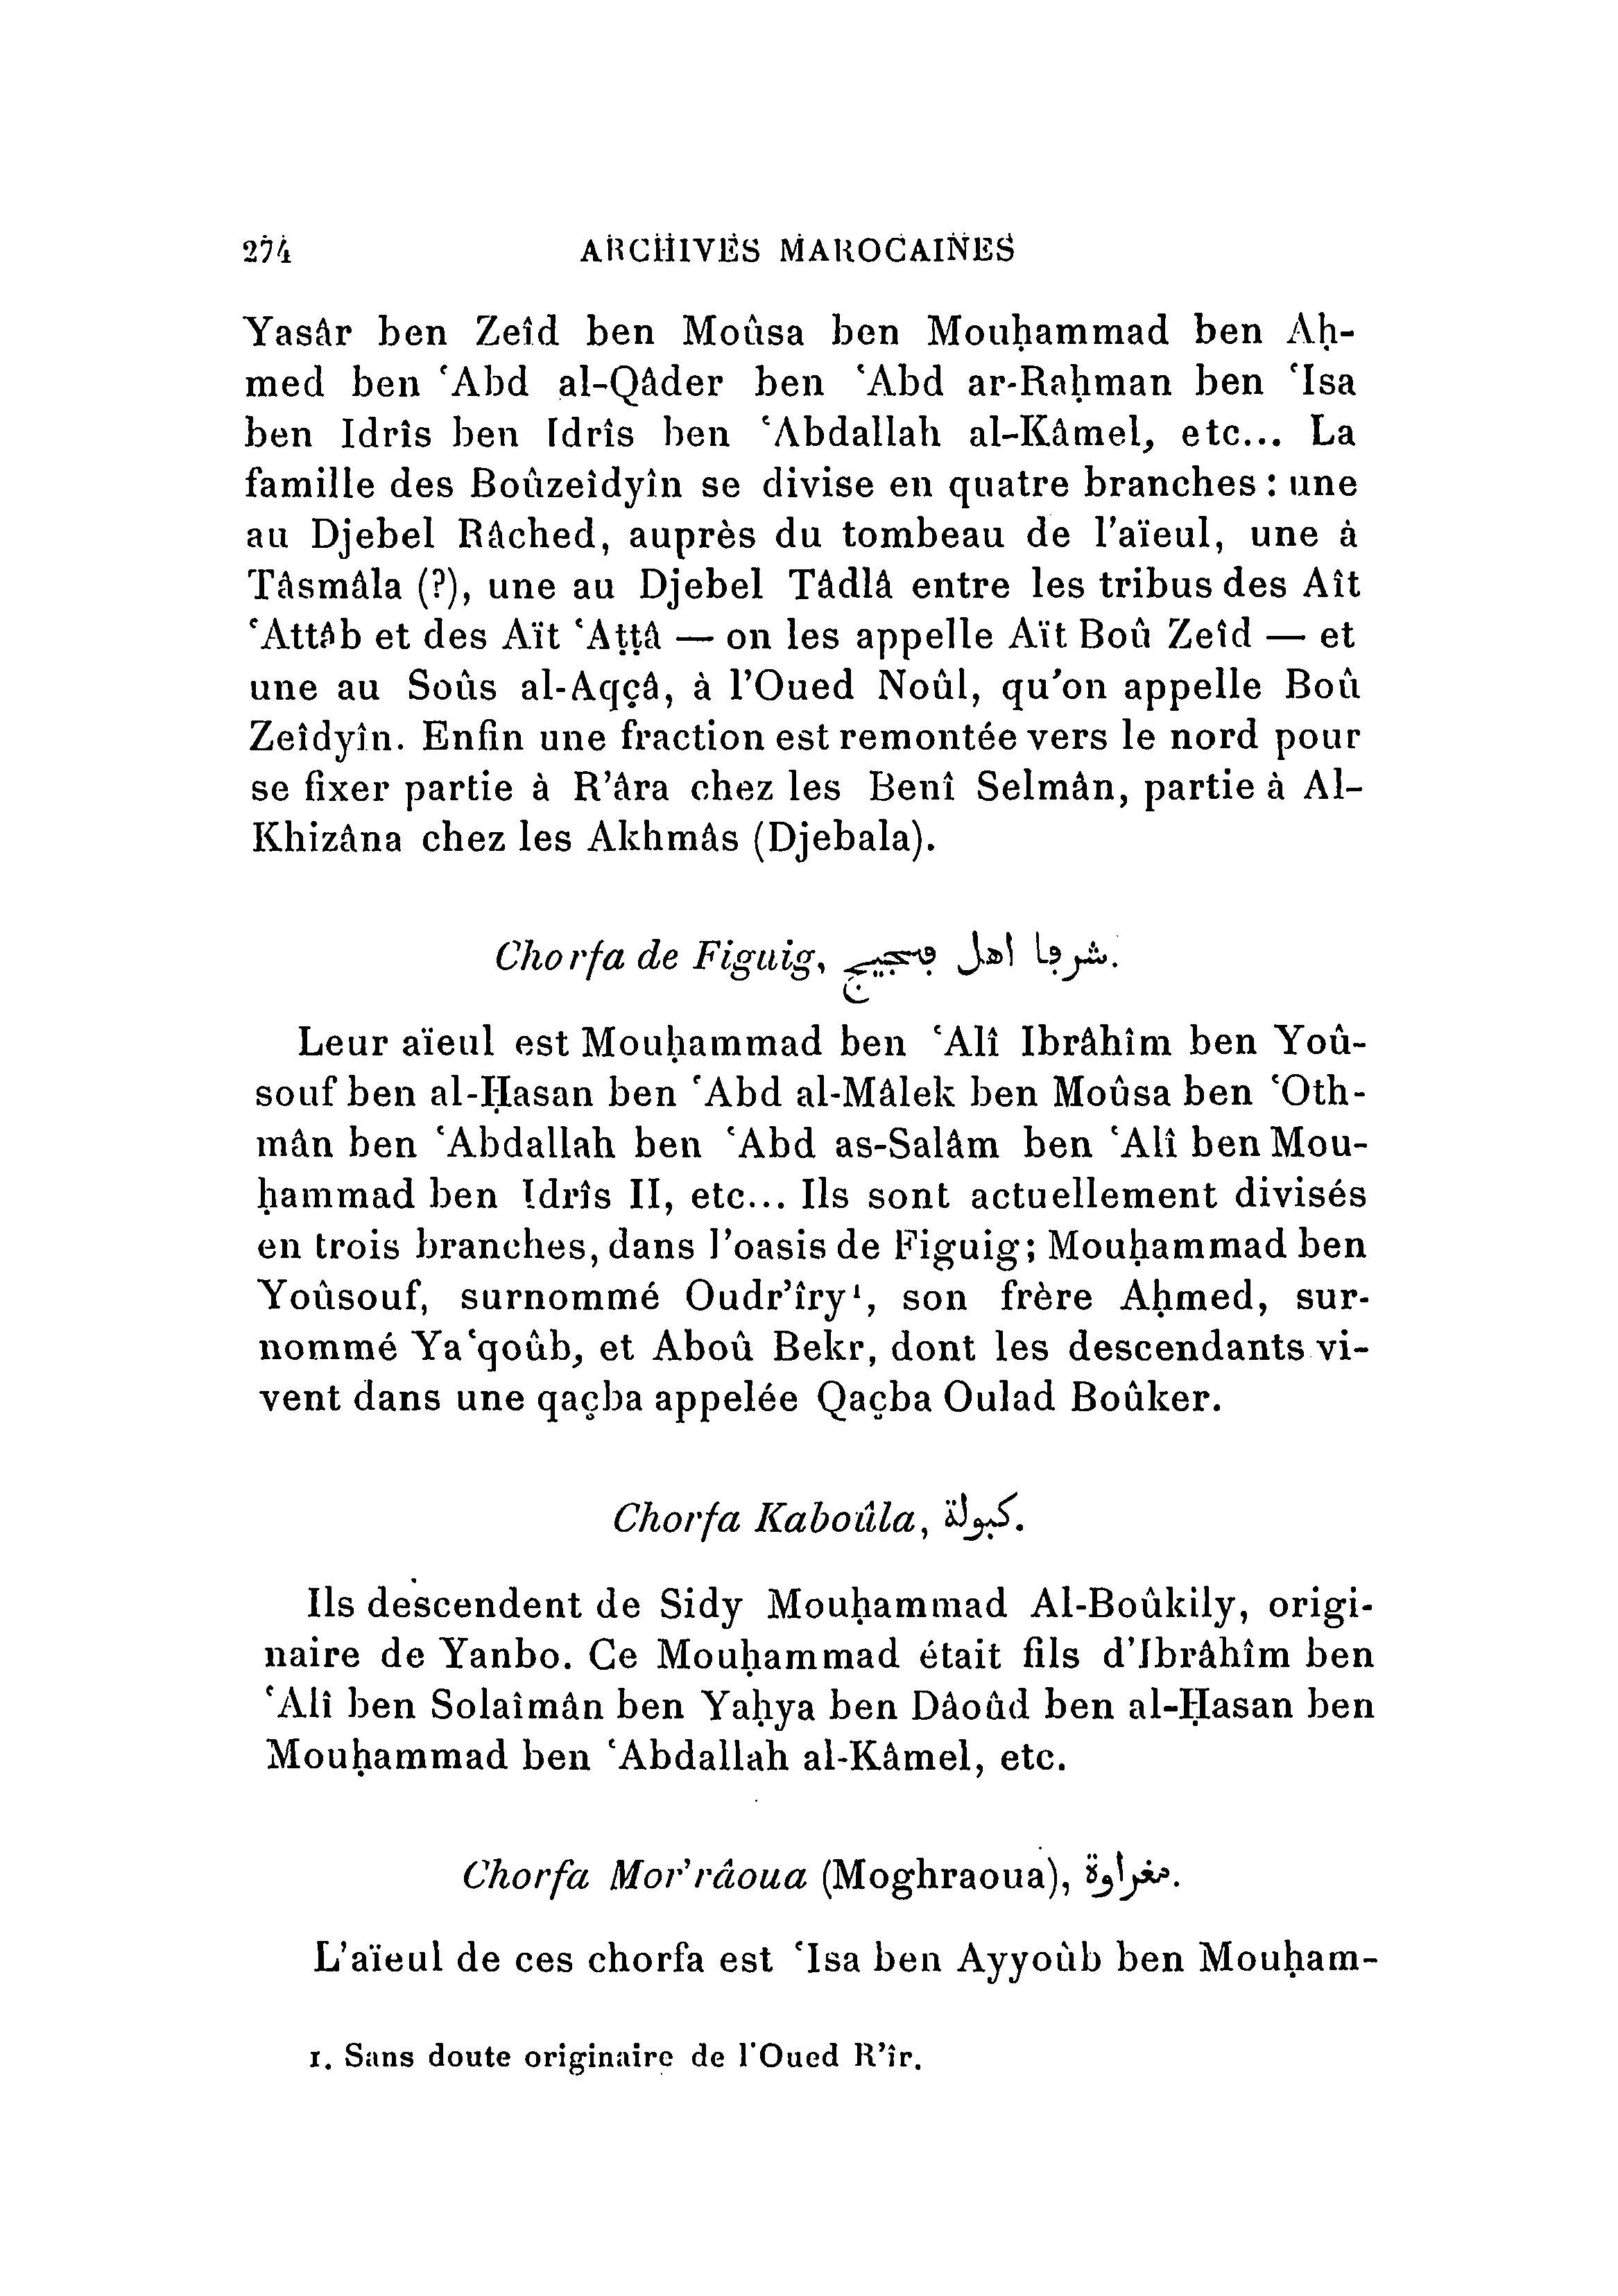 archives_marocaines-vol-2_1_page_449